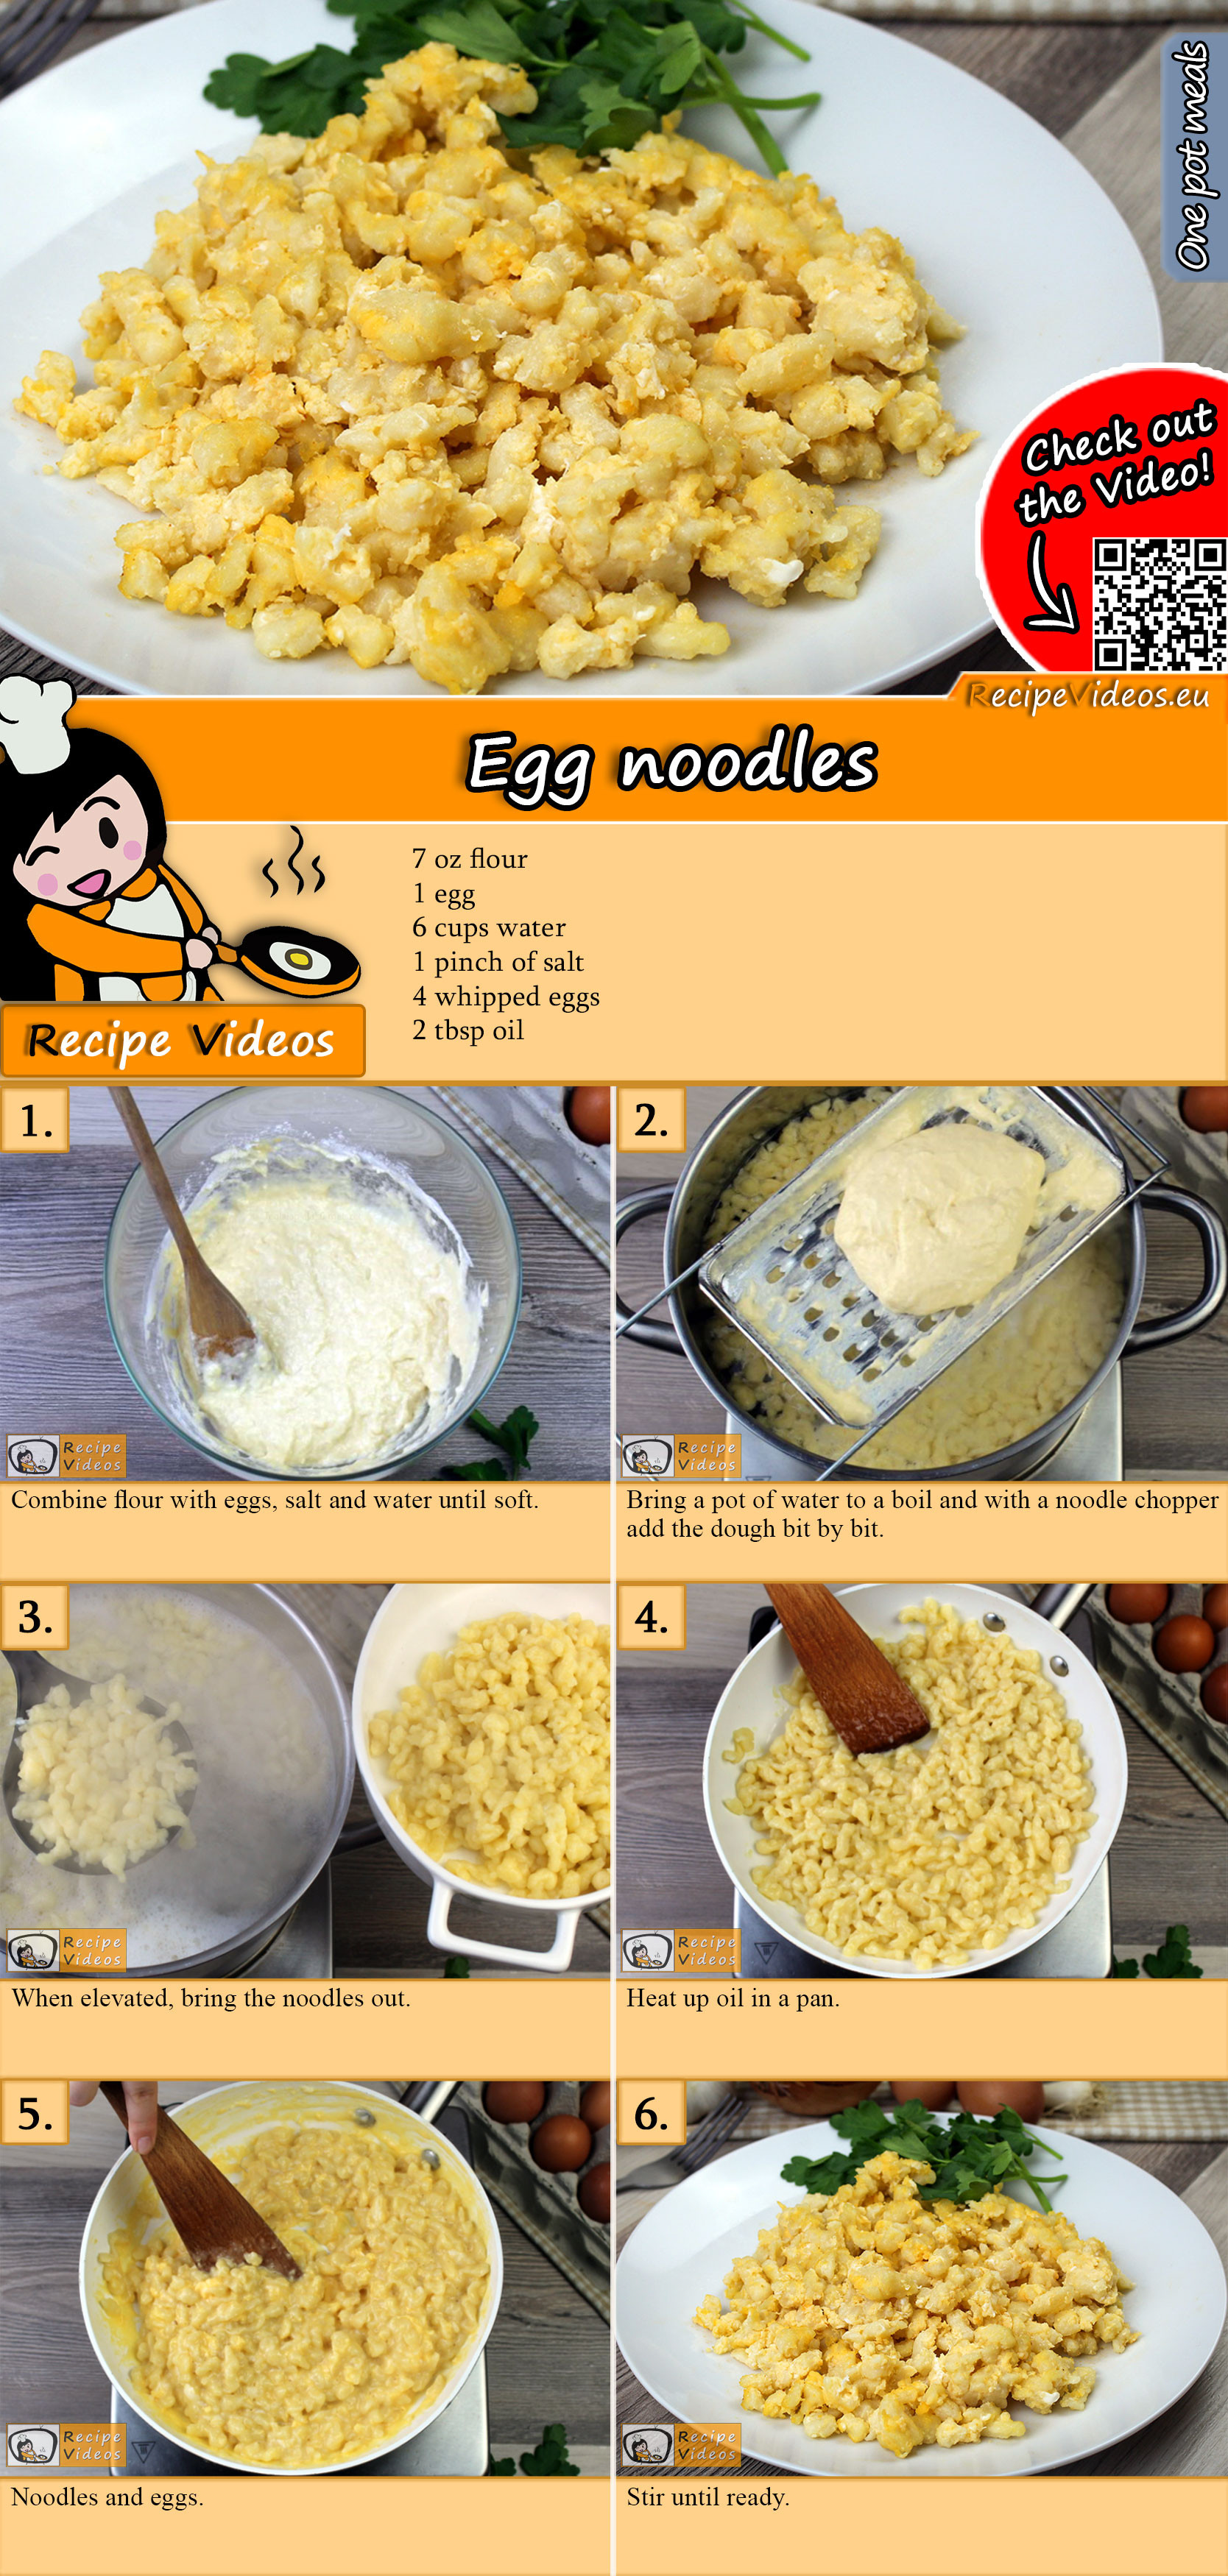 Egg noodles recipe with video